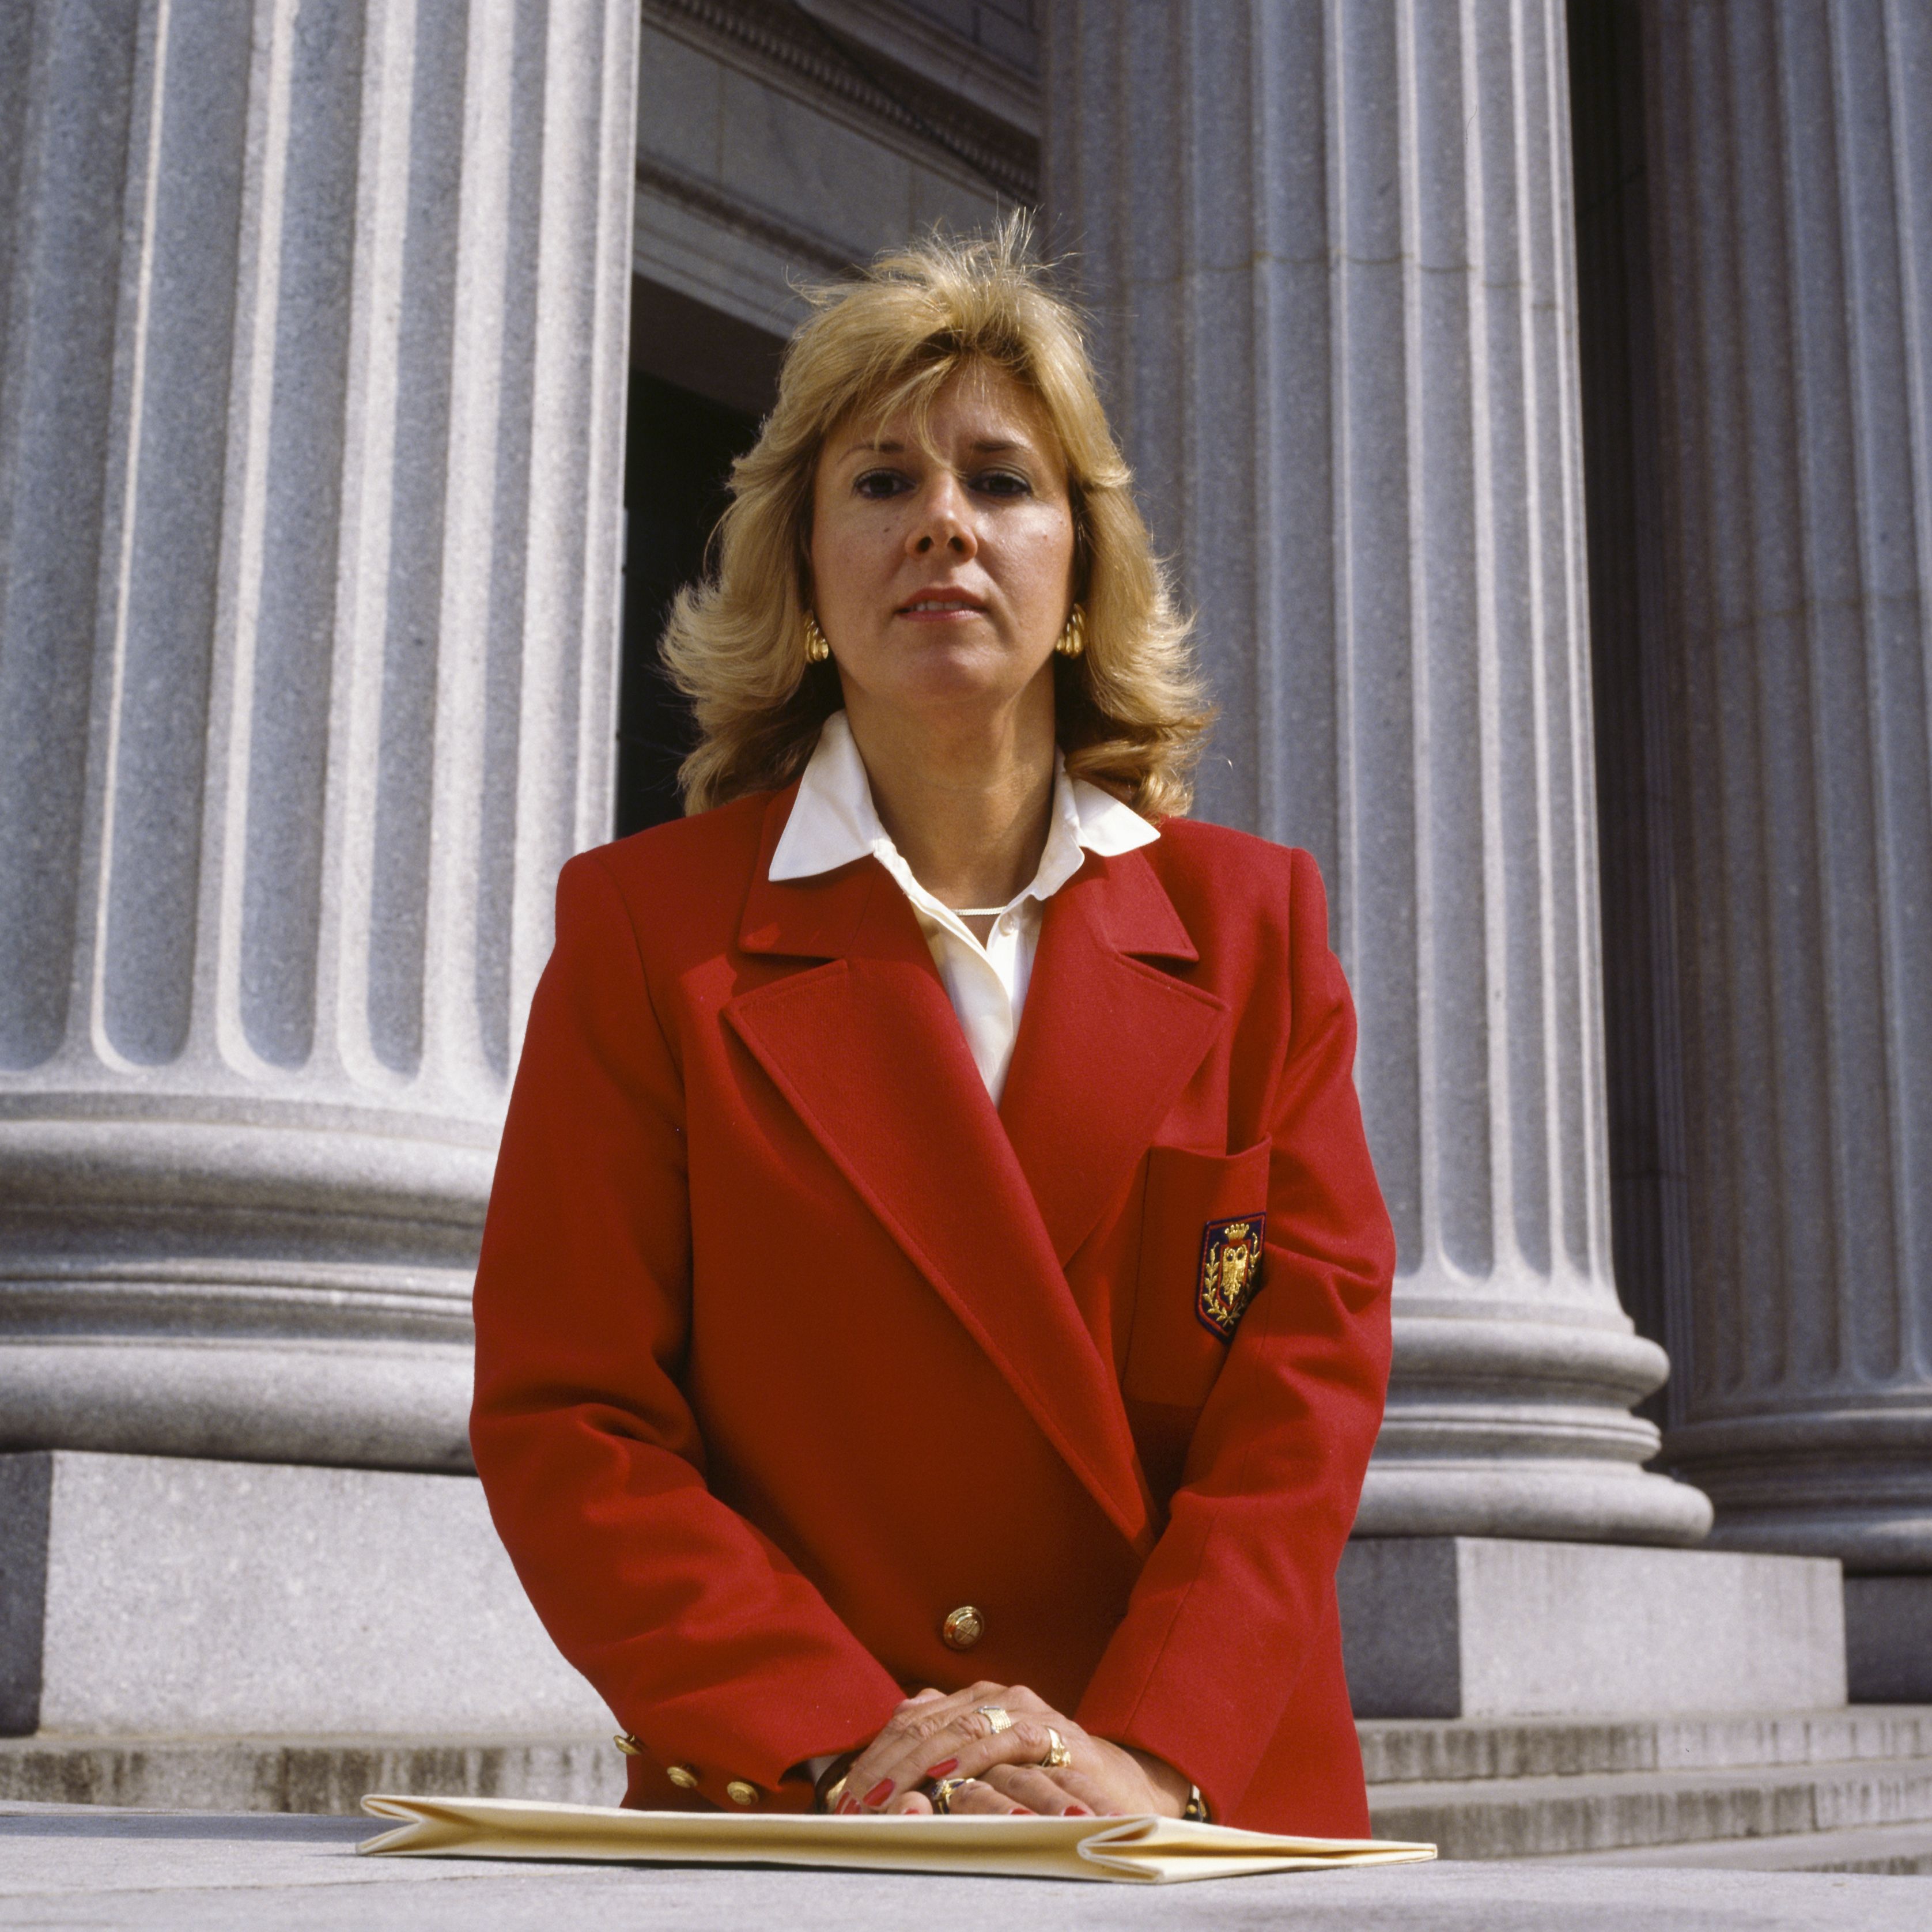 Who Is Central Park 5 Prosecutor Linda Fairstein? to About Books and